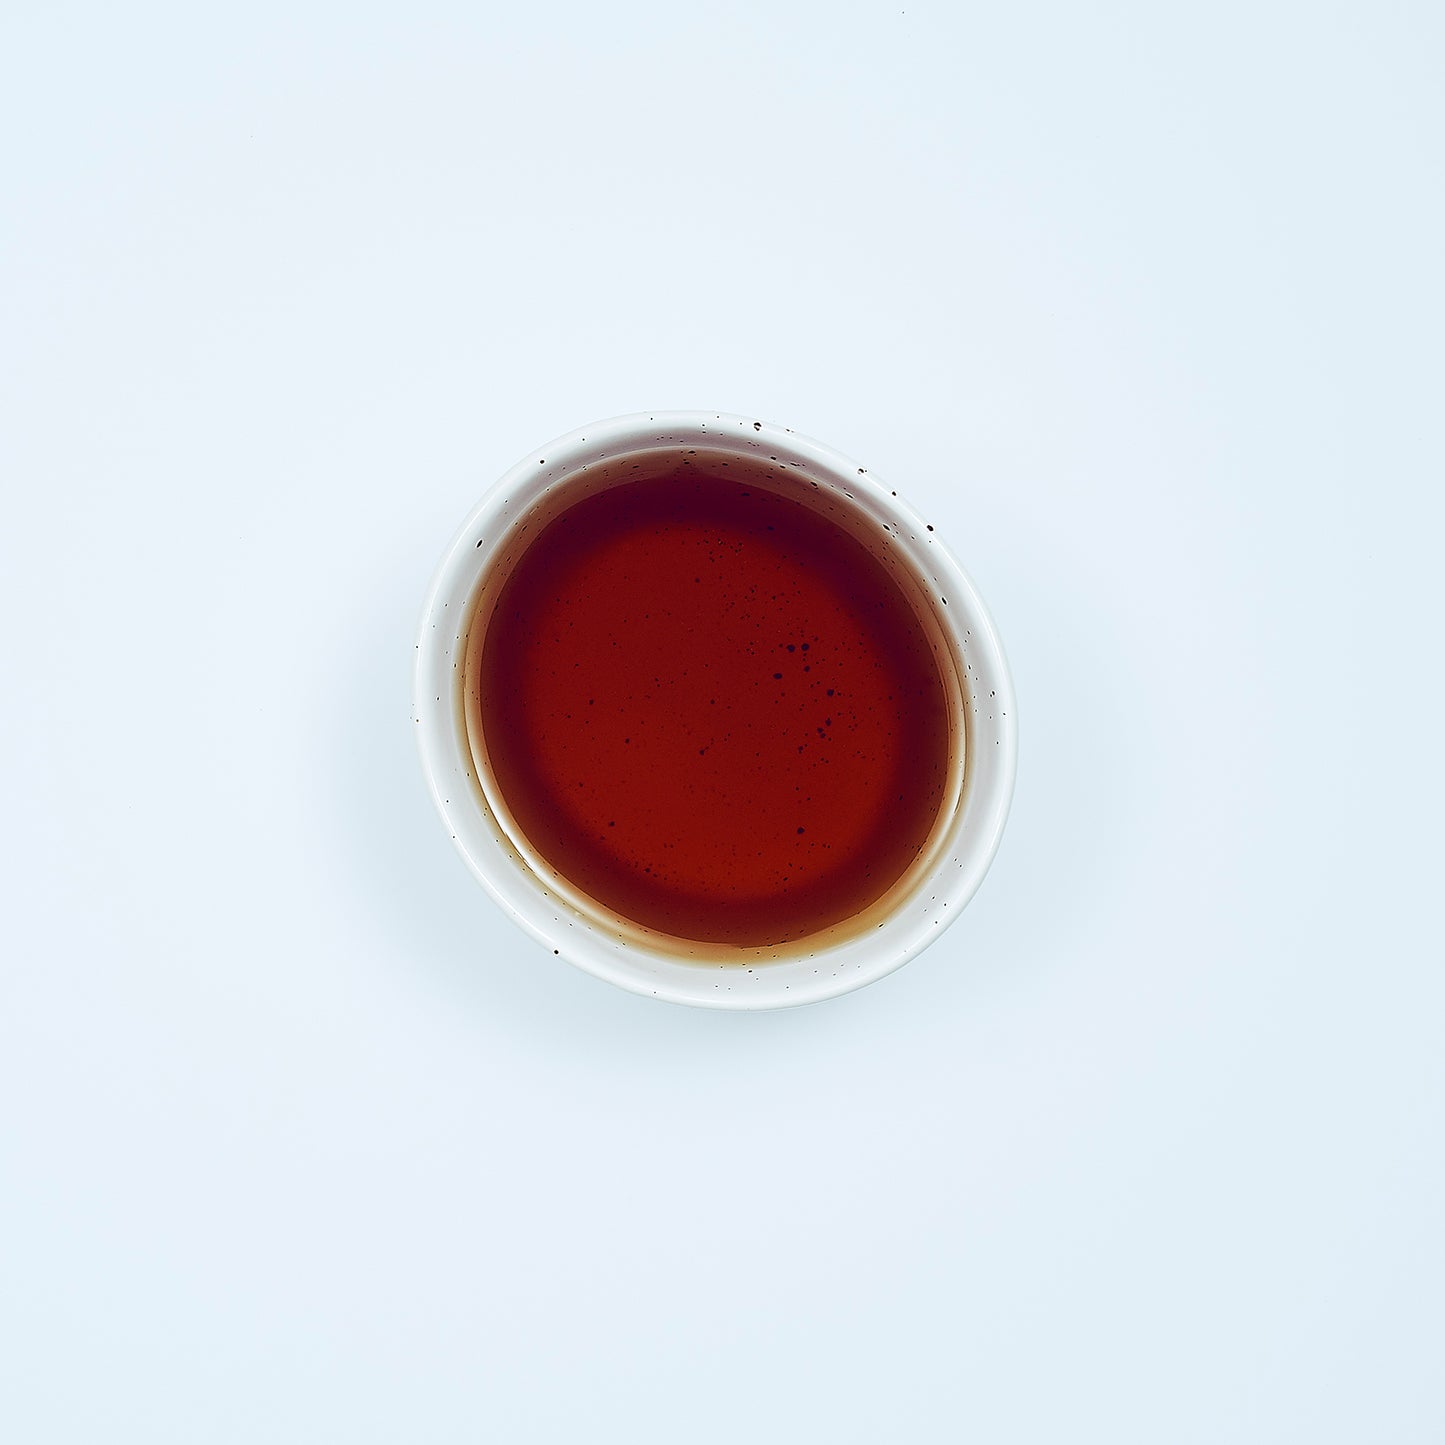 CALM: Rest, Ease, Exhale.This tranquil tea has swift adaptogenic properties to quickly alleviate stress, calm the mind and nervous system. It also promotes cognitive function, and has aromatSmooth September, LLCOur Tea CollectionHerbal Tea by Hand